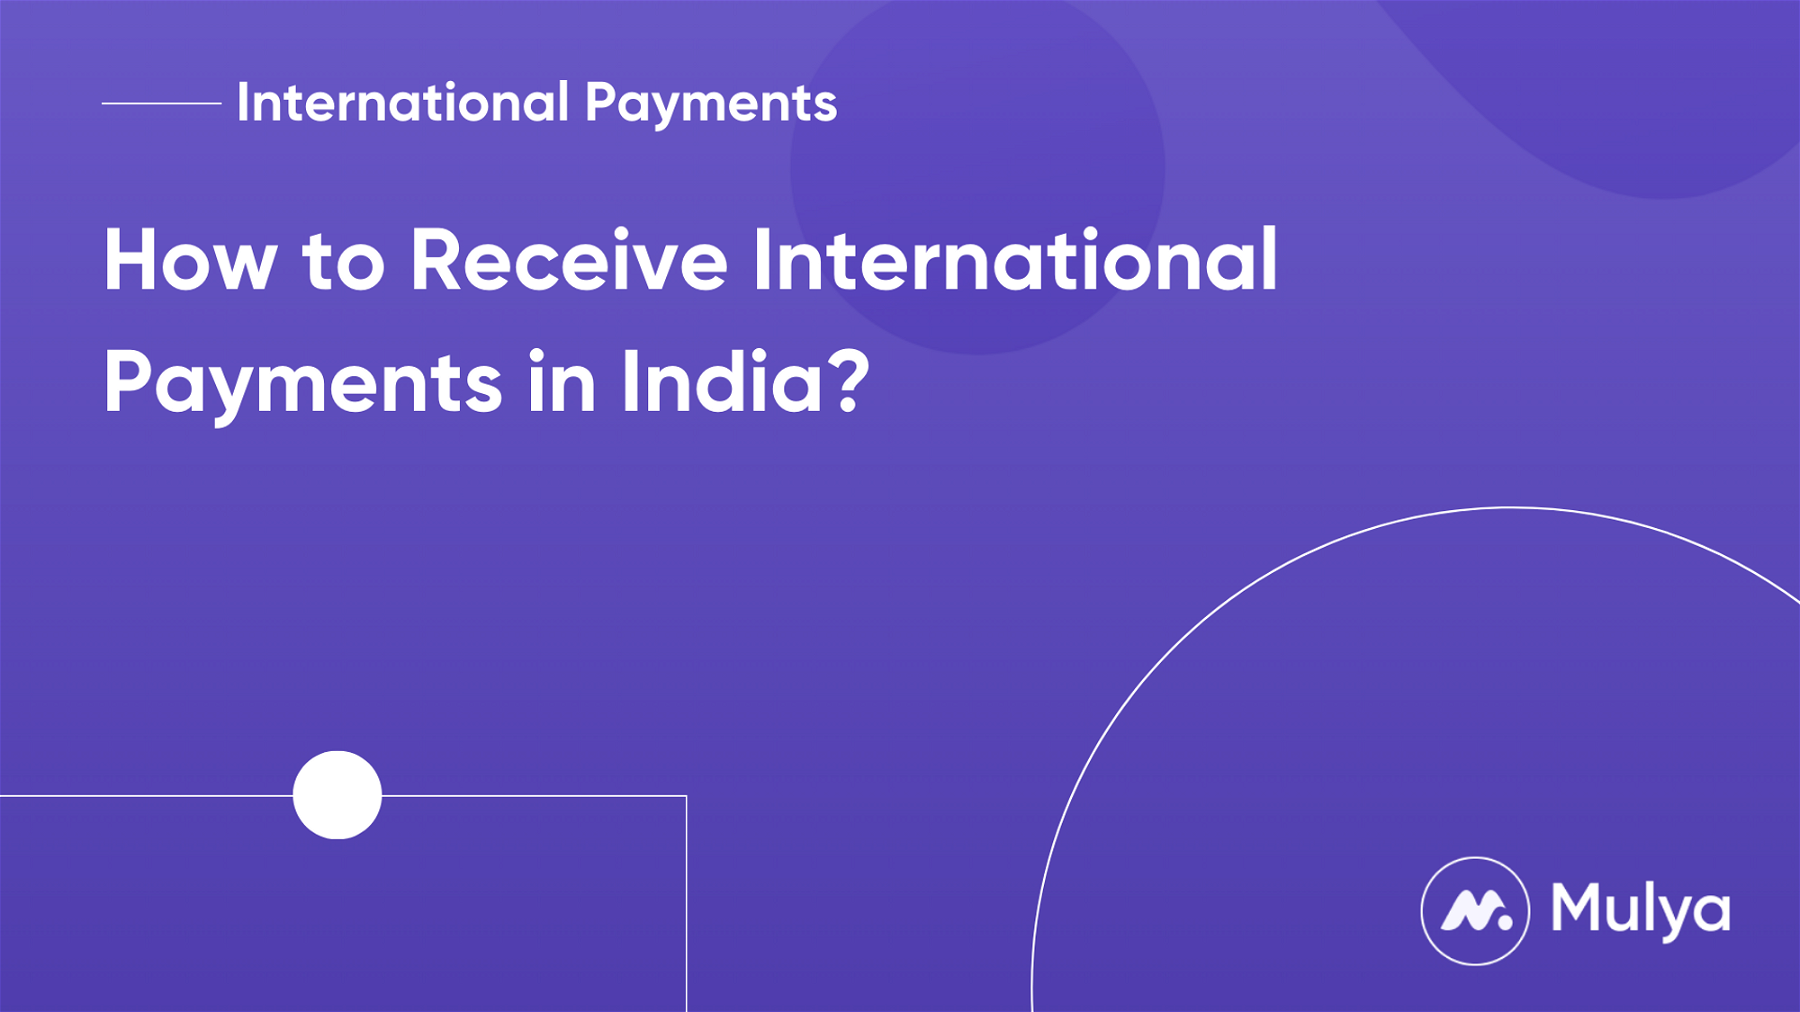 How to Receive International Payments in India?